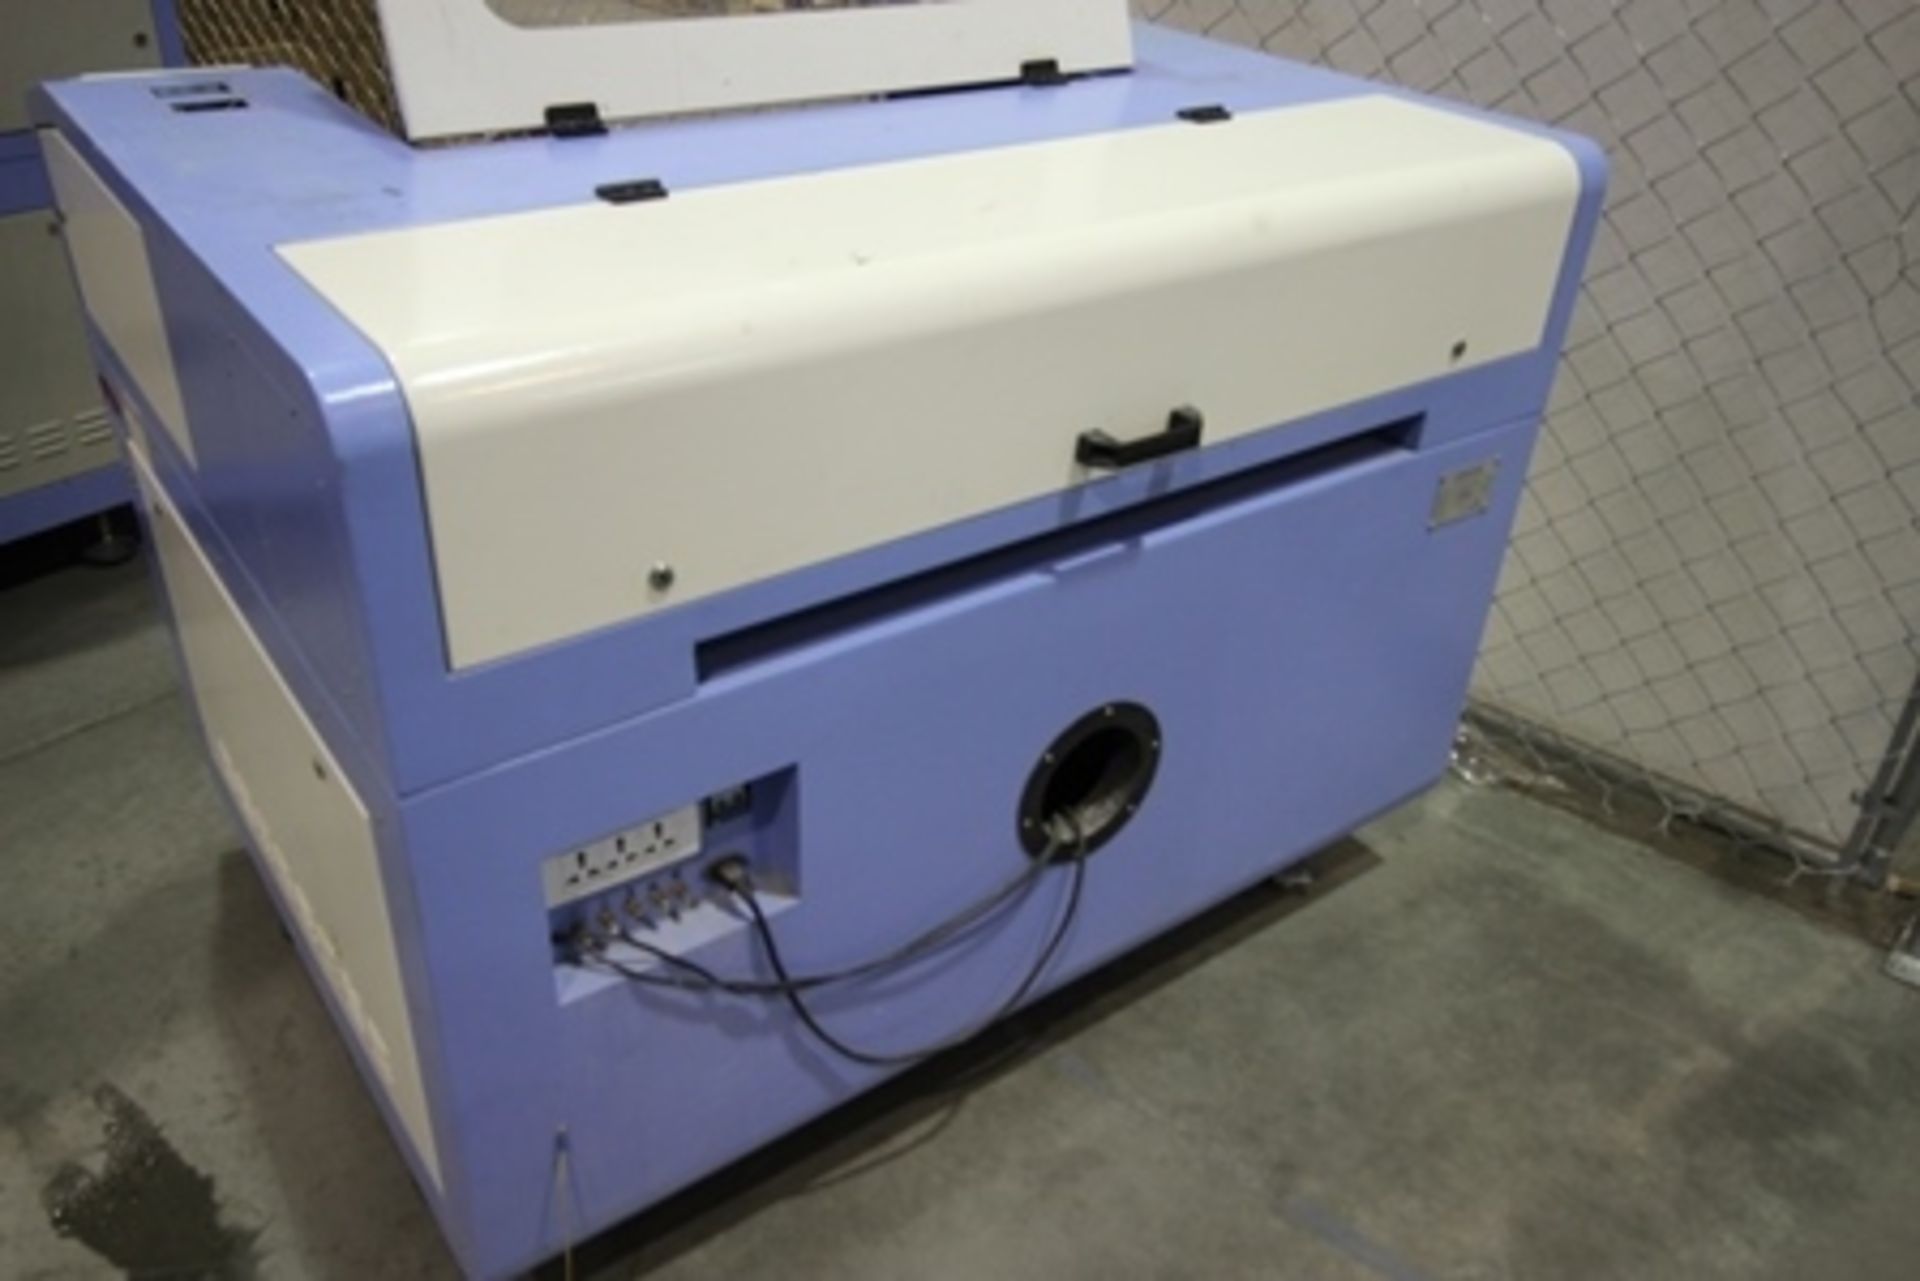 Phillican CO2 laser engraver and cutting machine, model 6090. - Image 22 of 23